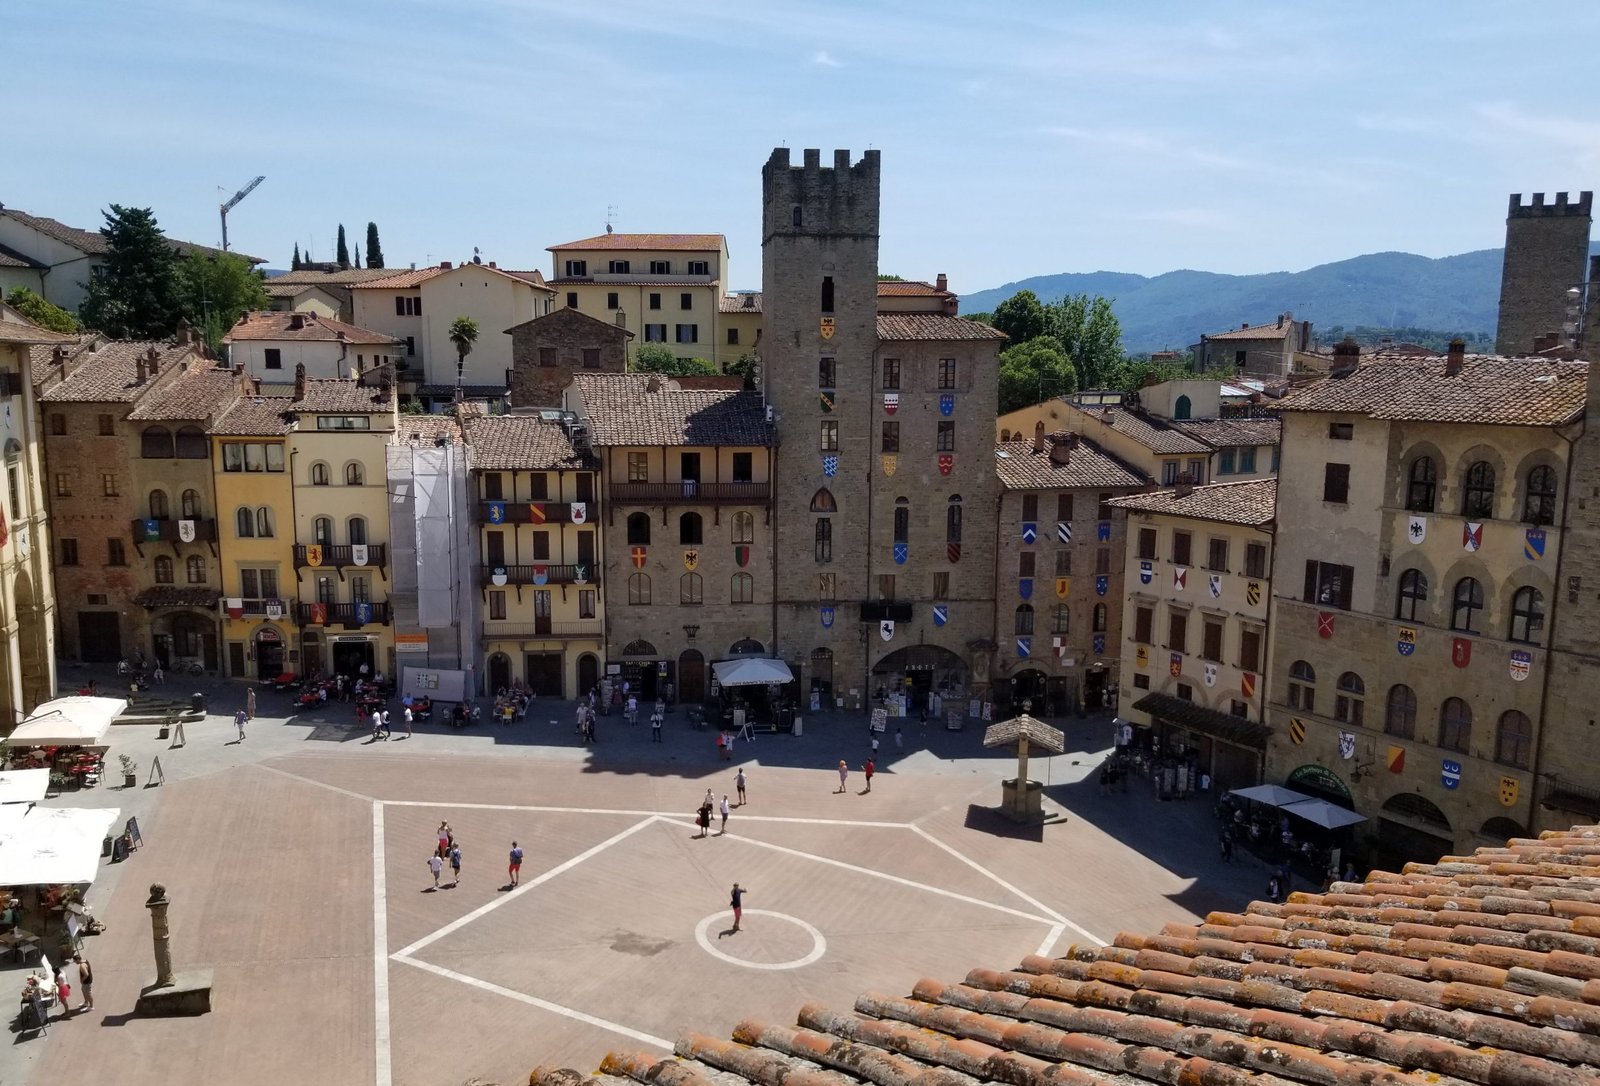 Spotlight: Our love of Arezzo and return in 2020. Arezzo is in Tuscany, Italy. https://ouritalianjourney.com/arezzo-tuscany-italy